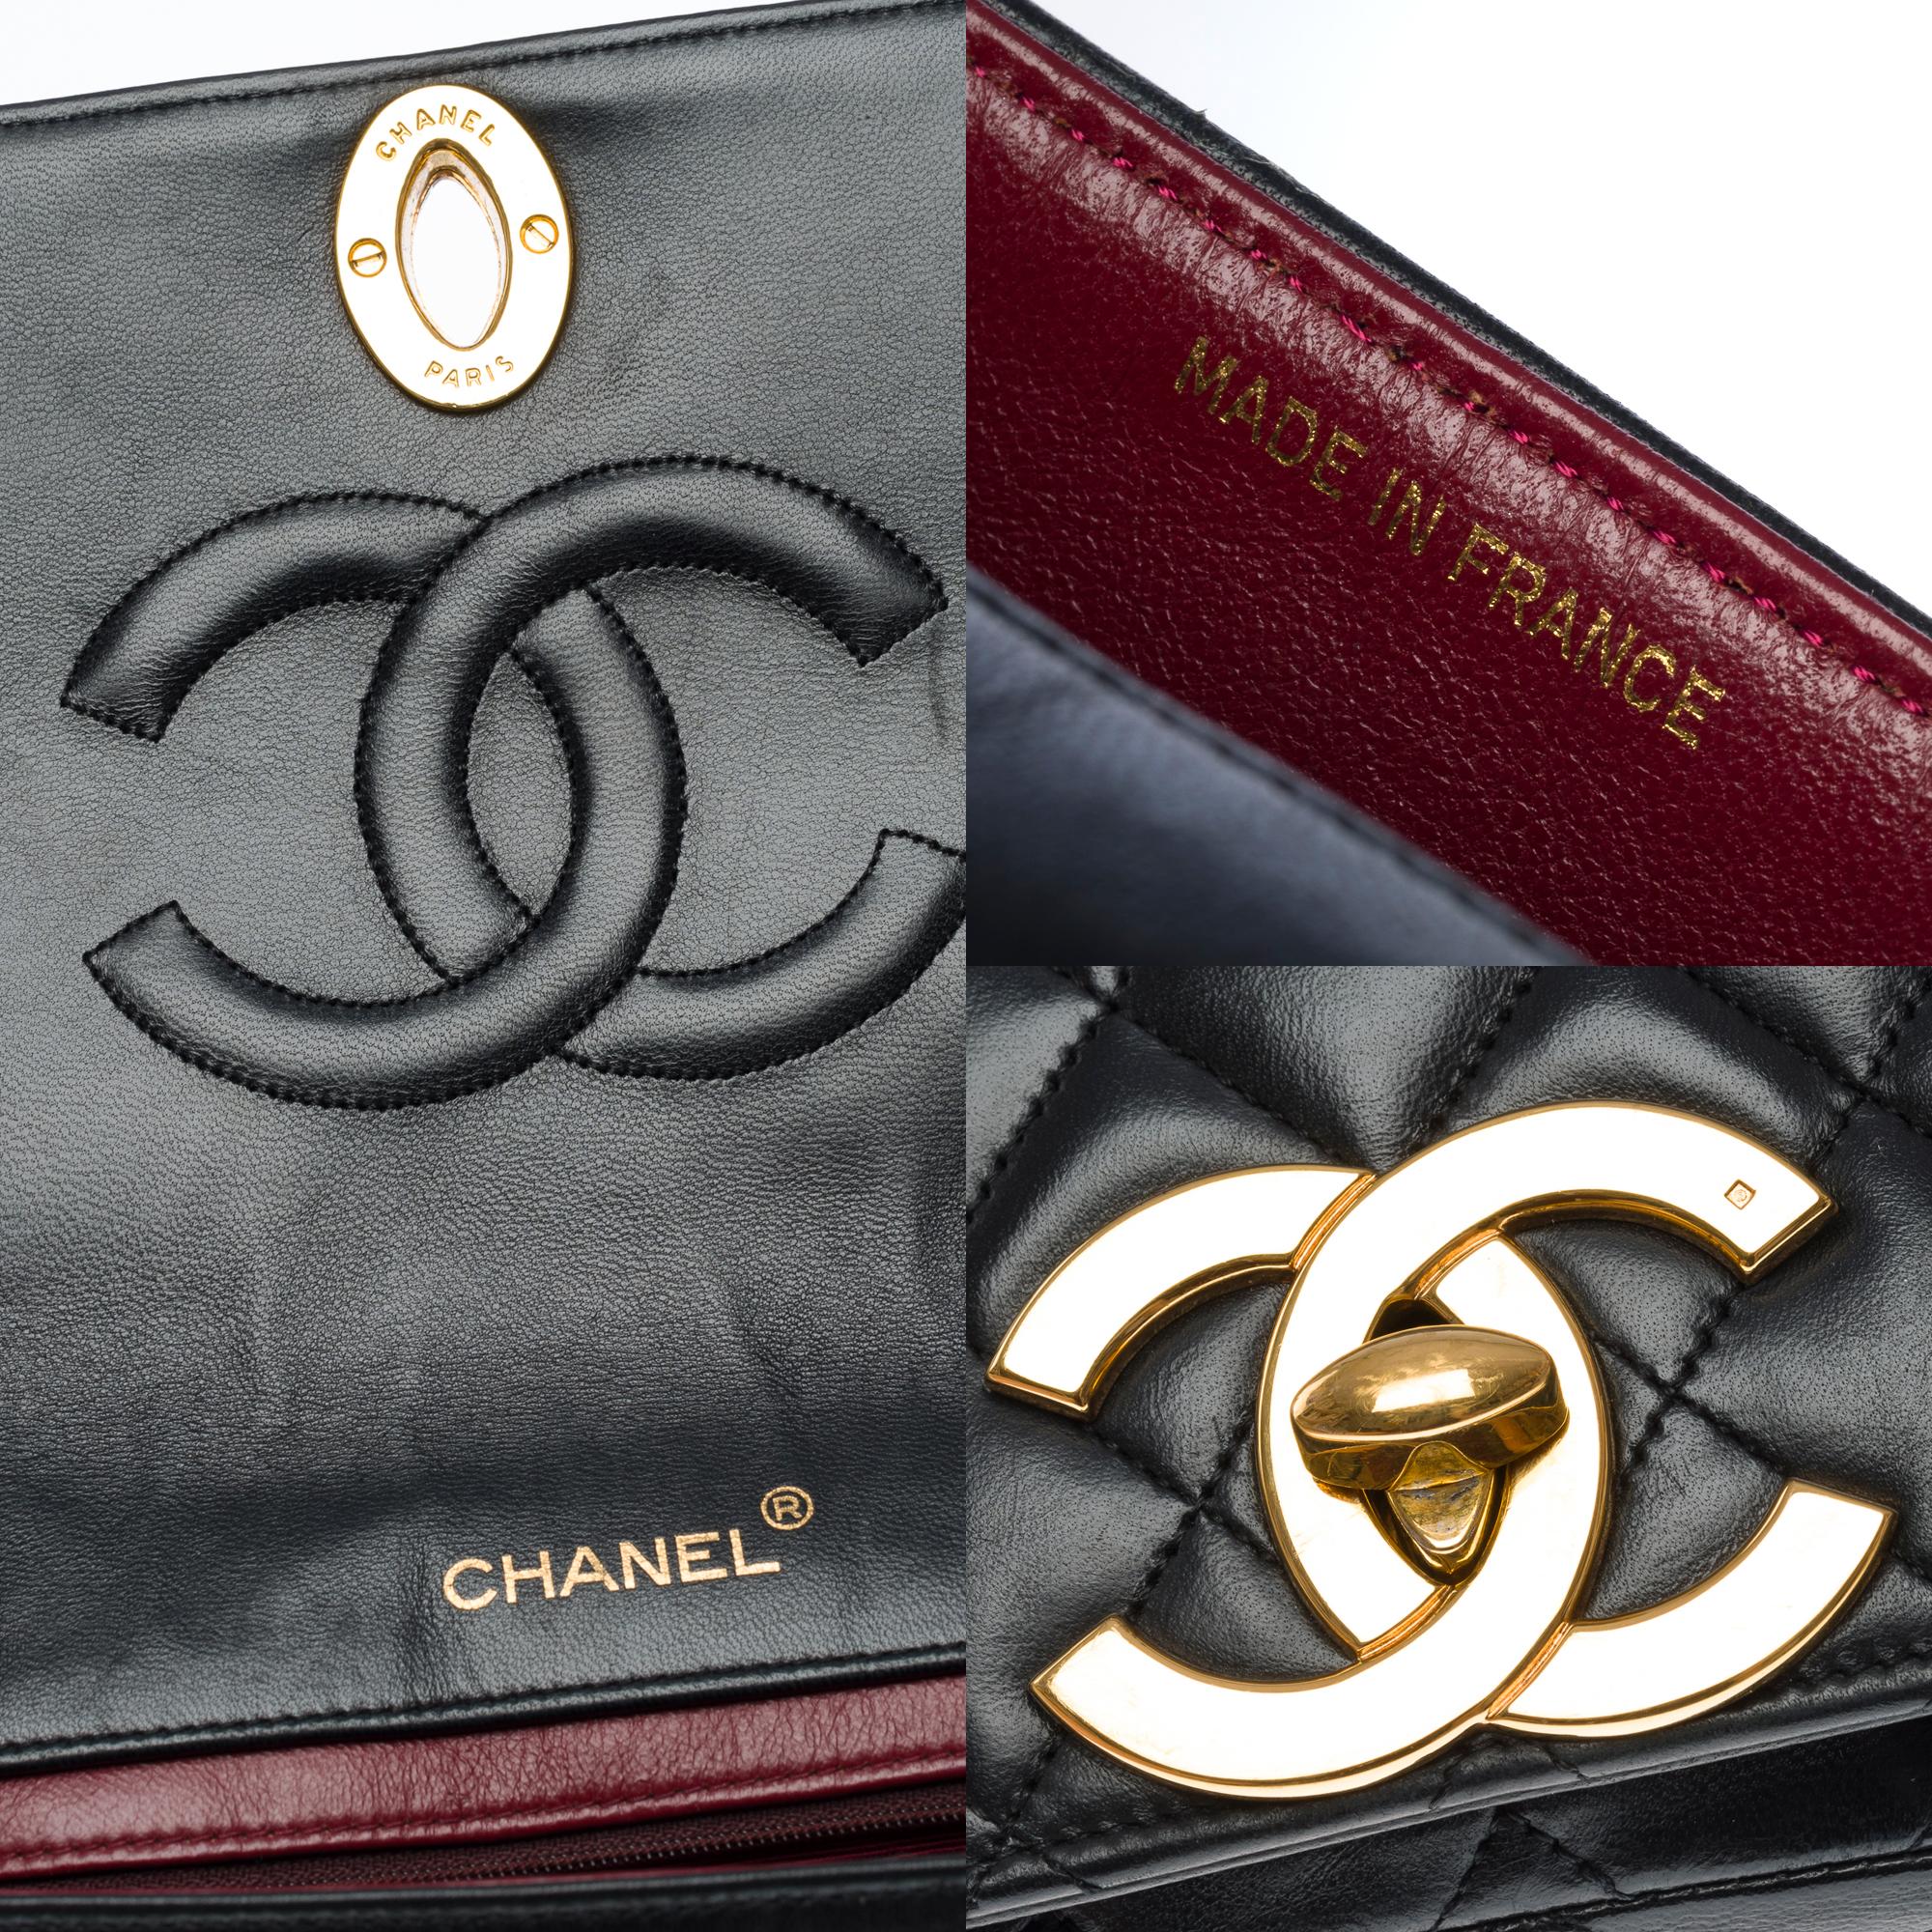 Chanel Classic Full Flap shoulder bag in black quilted lambskin leather, GHW For Sale 3